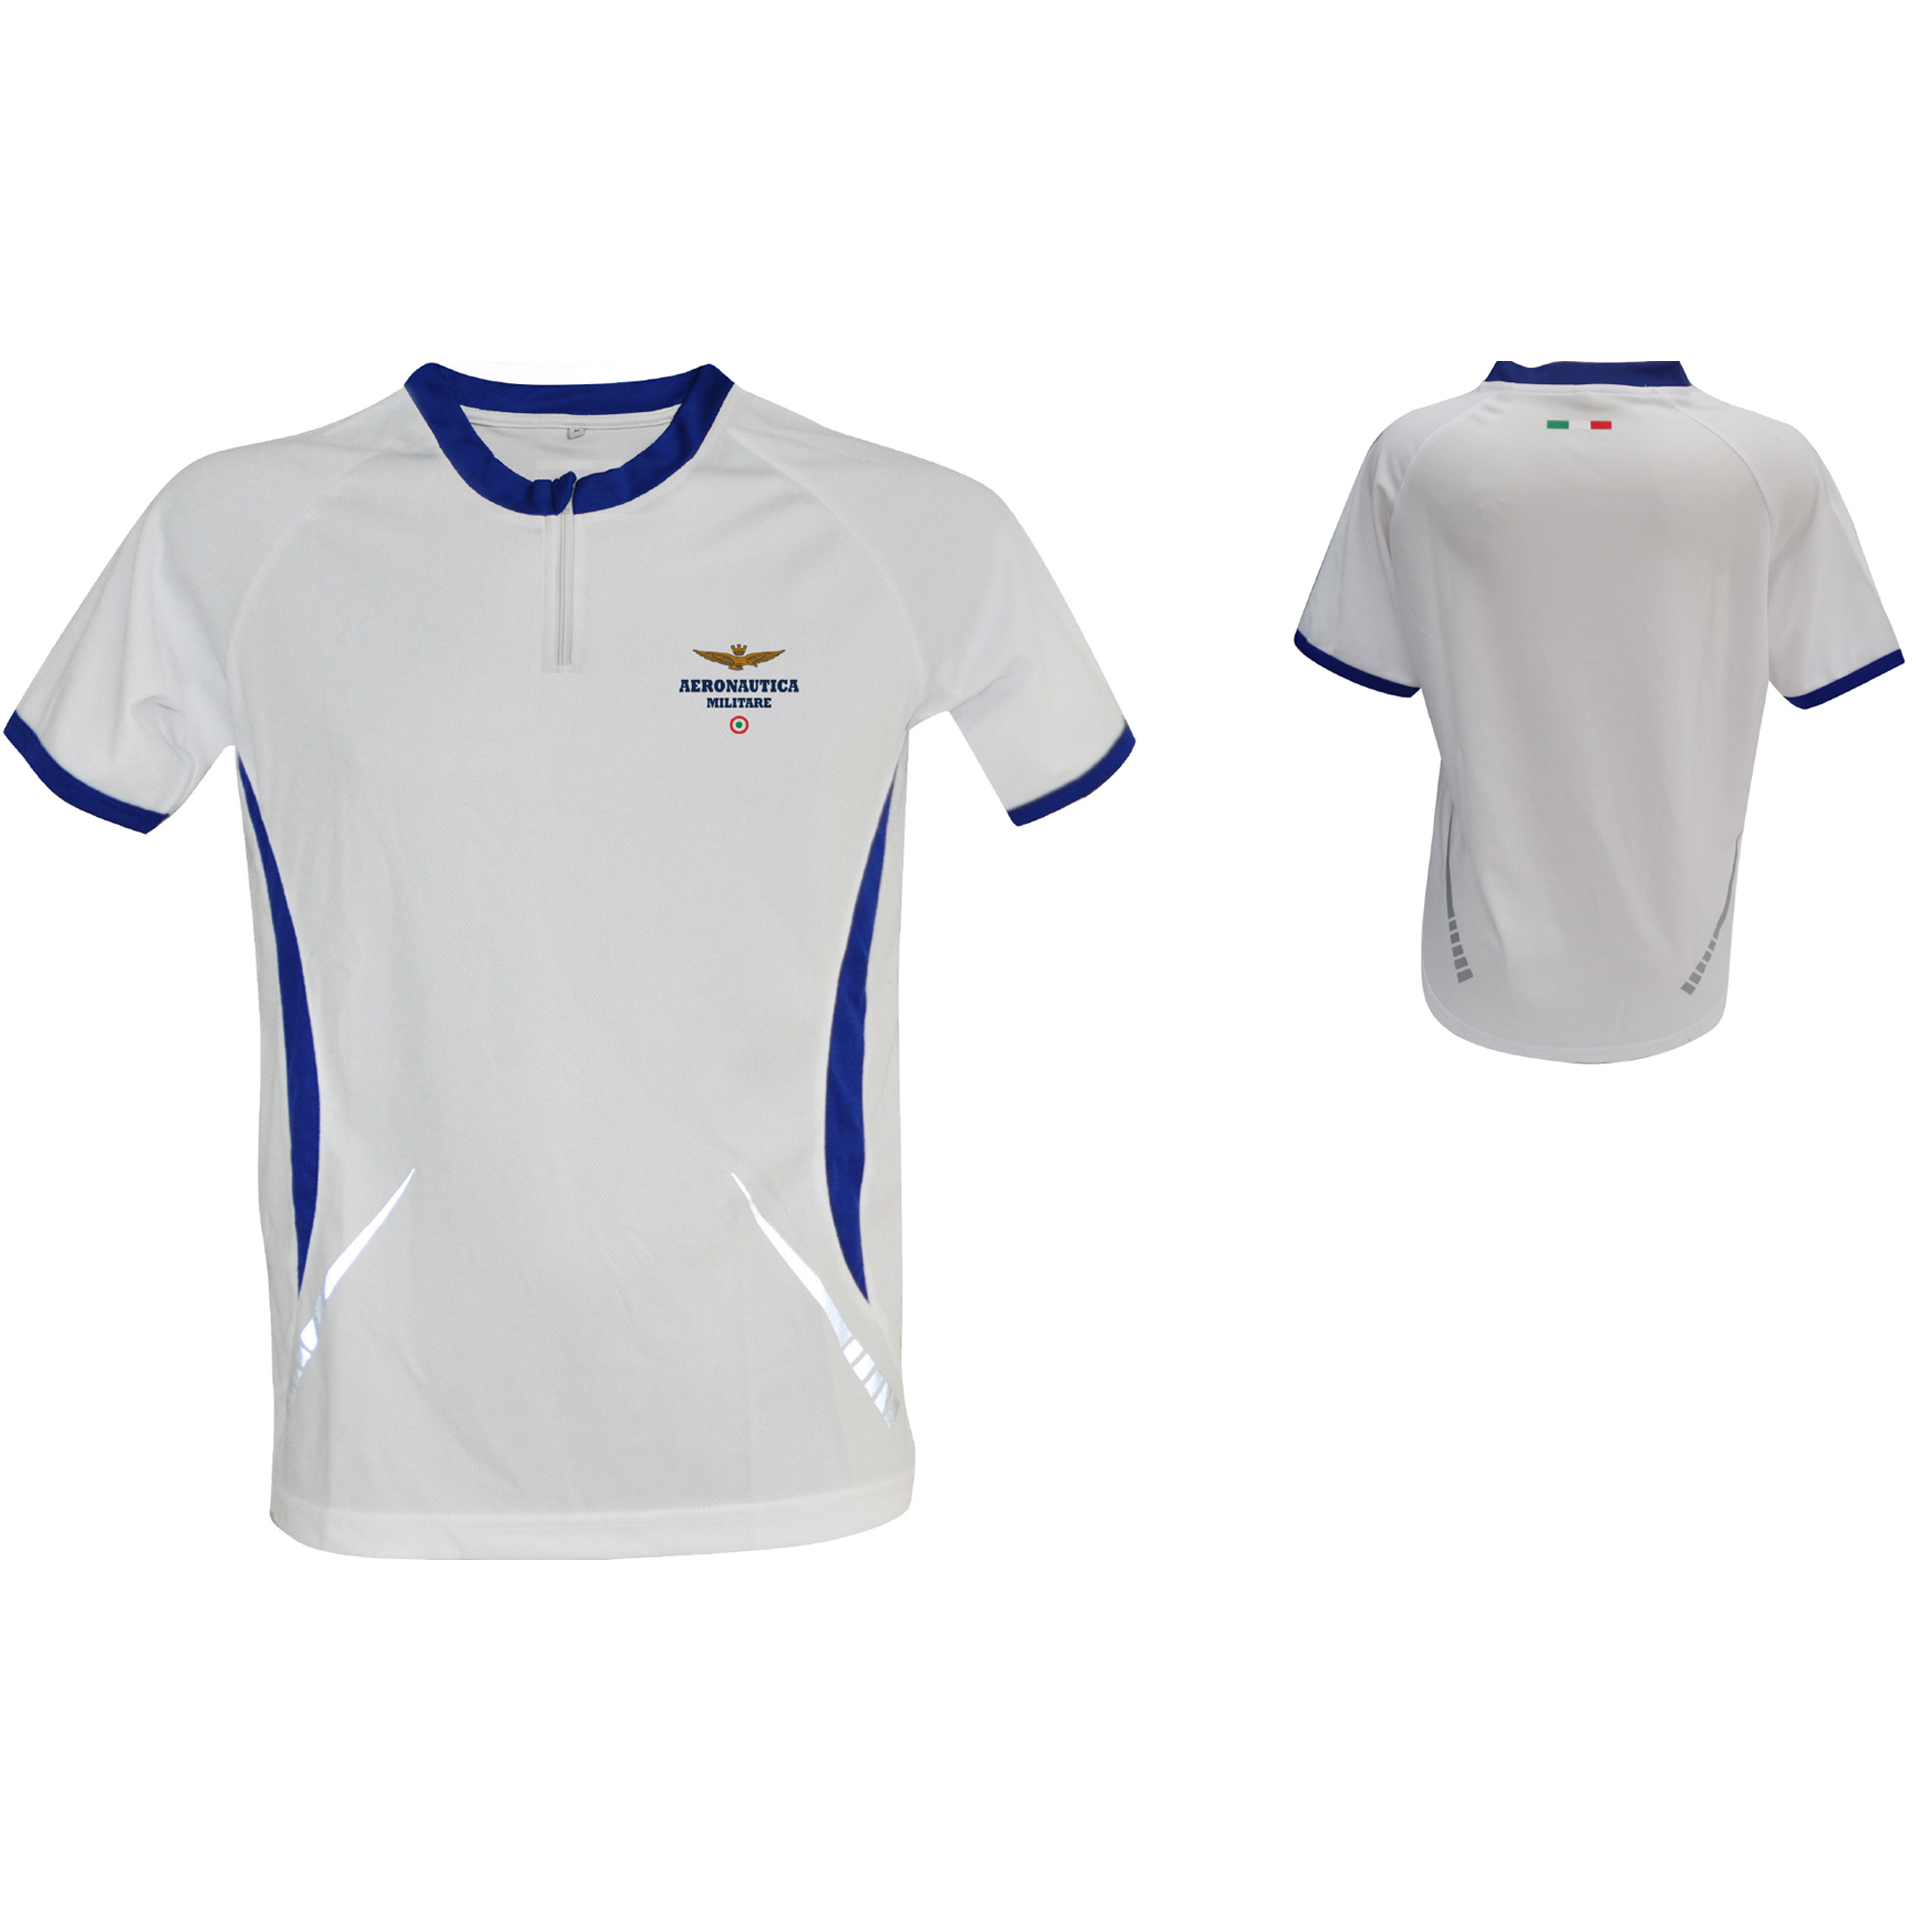 T-SHIRT RUNNING CON ZIP, LOGO STAMPATO, 100% POLIESTERE A.M.